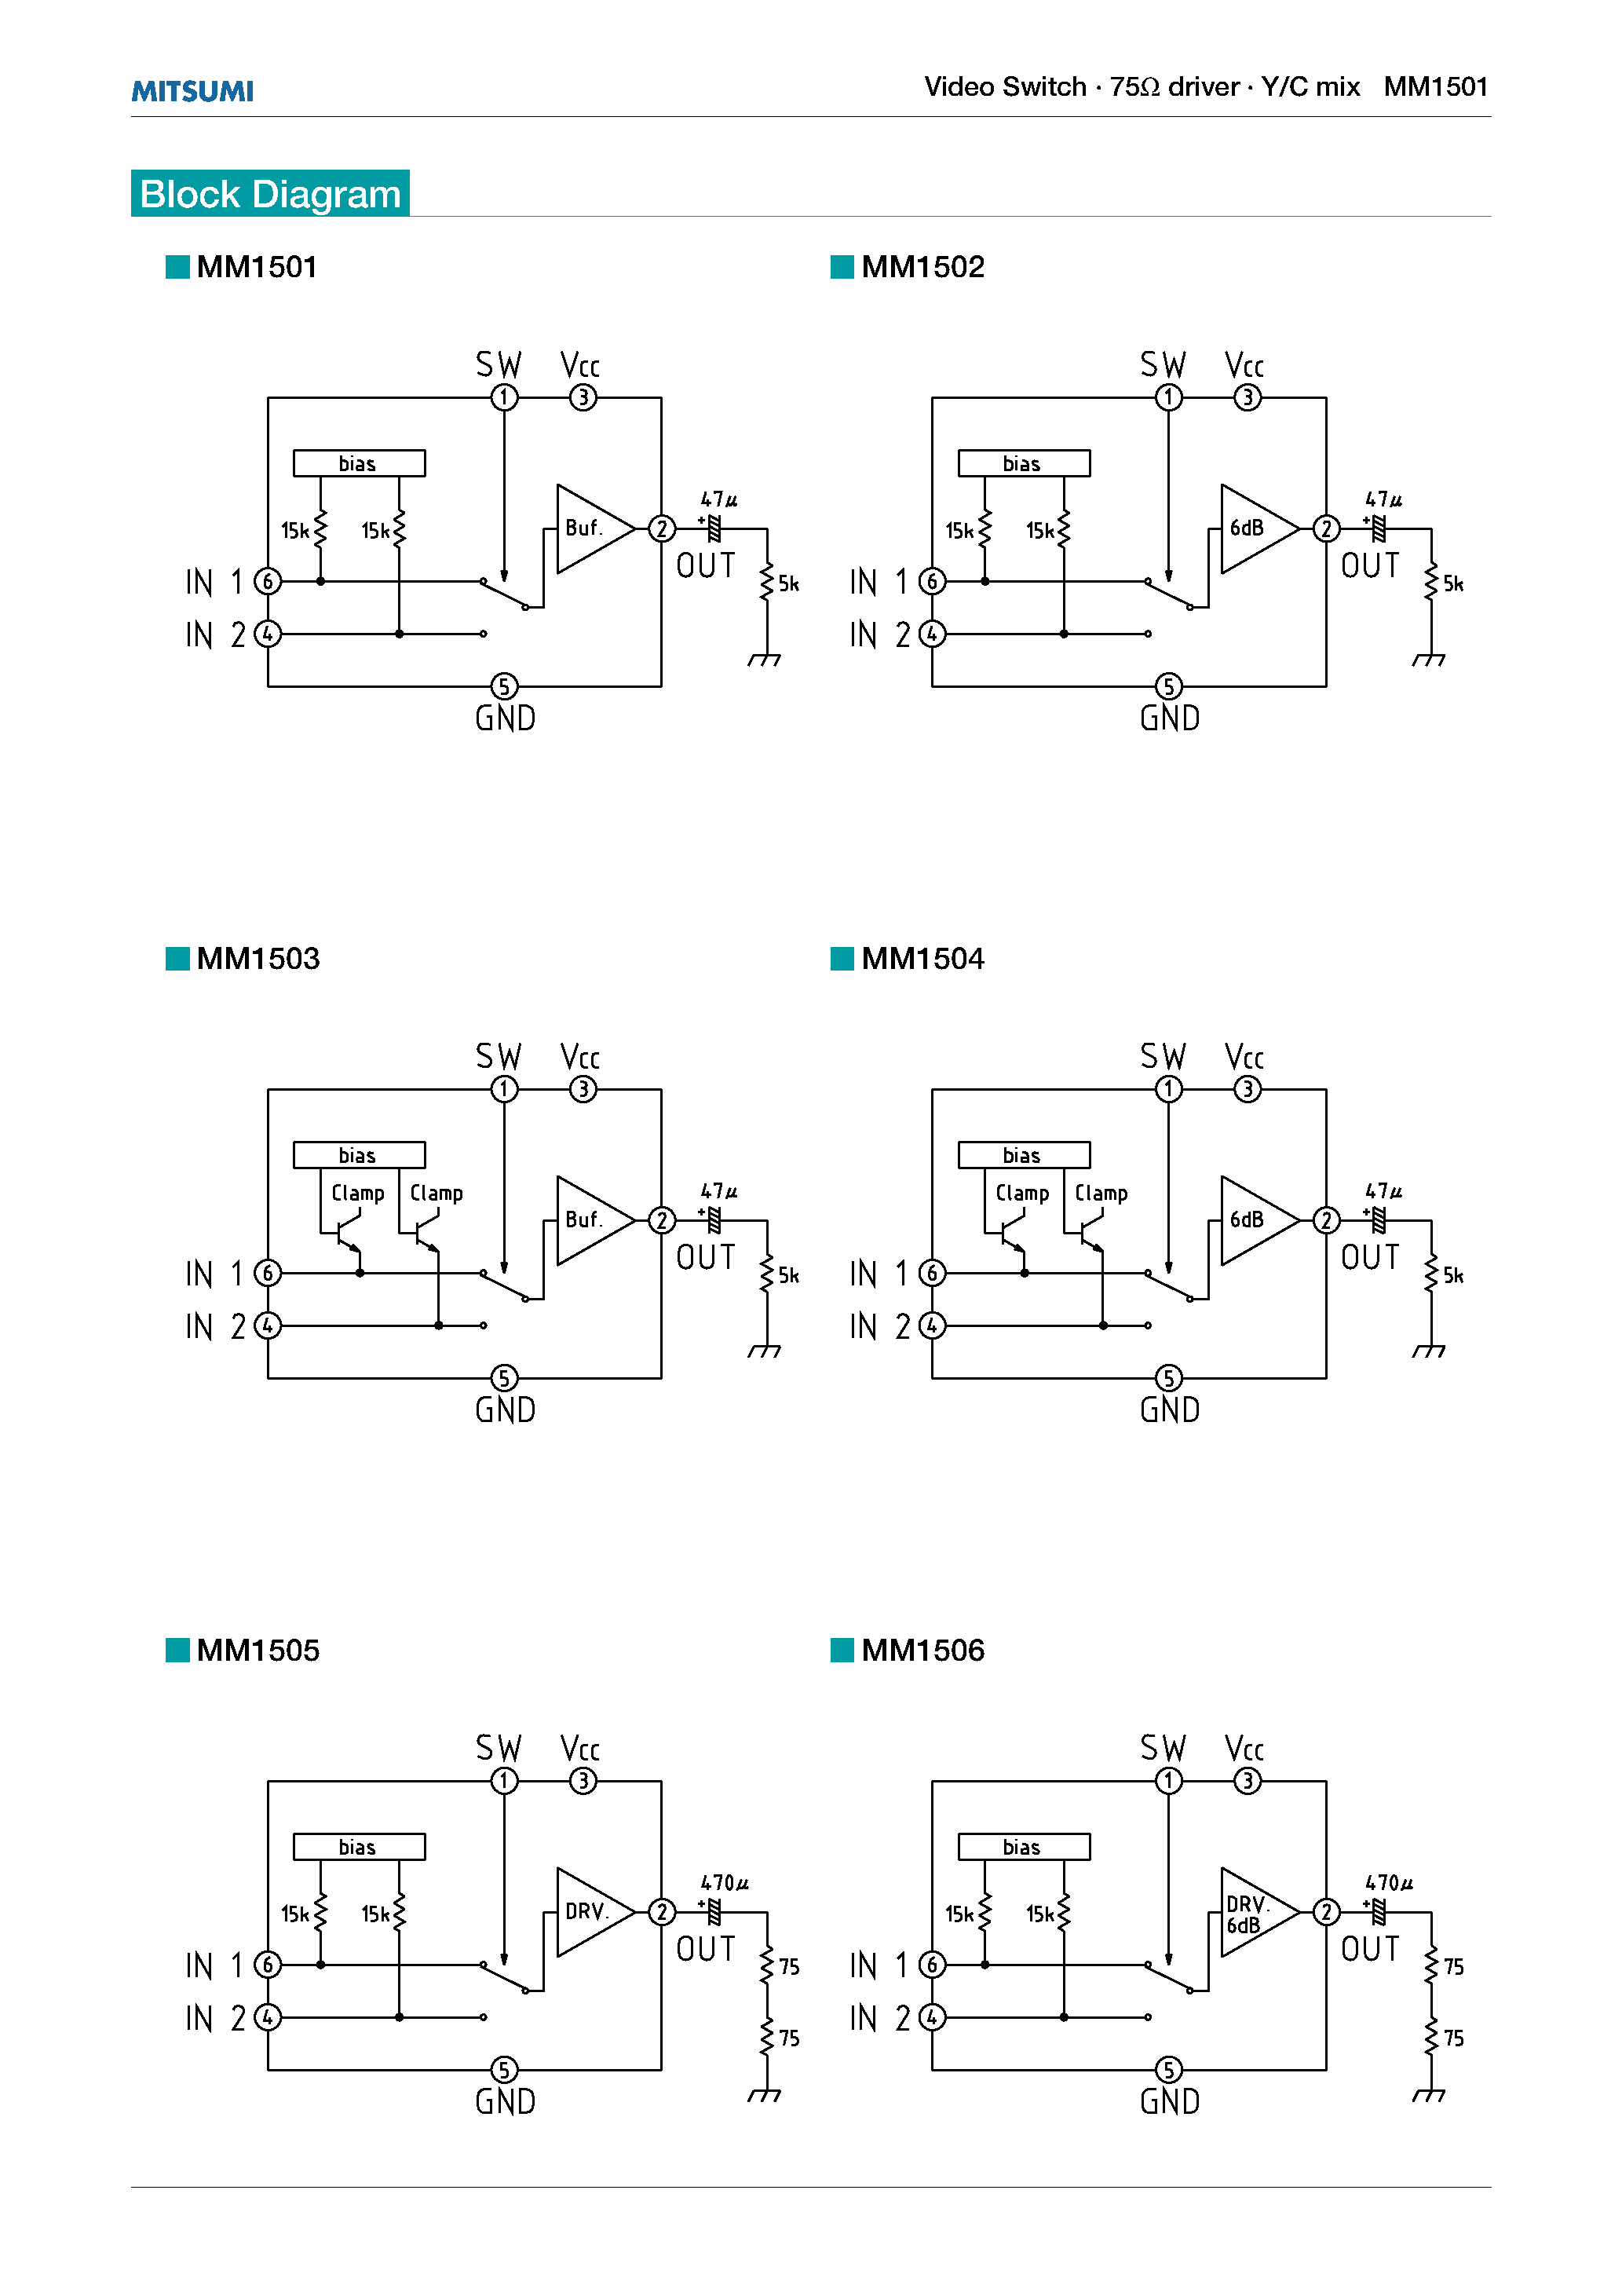 Datasheet MM1503 - Video Switch 75 driver Y/C mix page 2